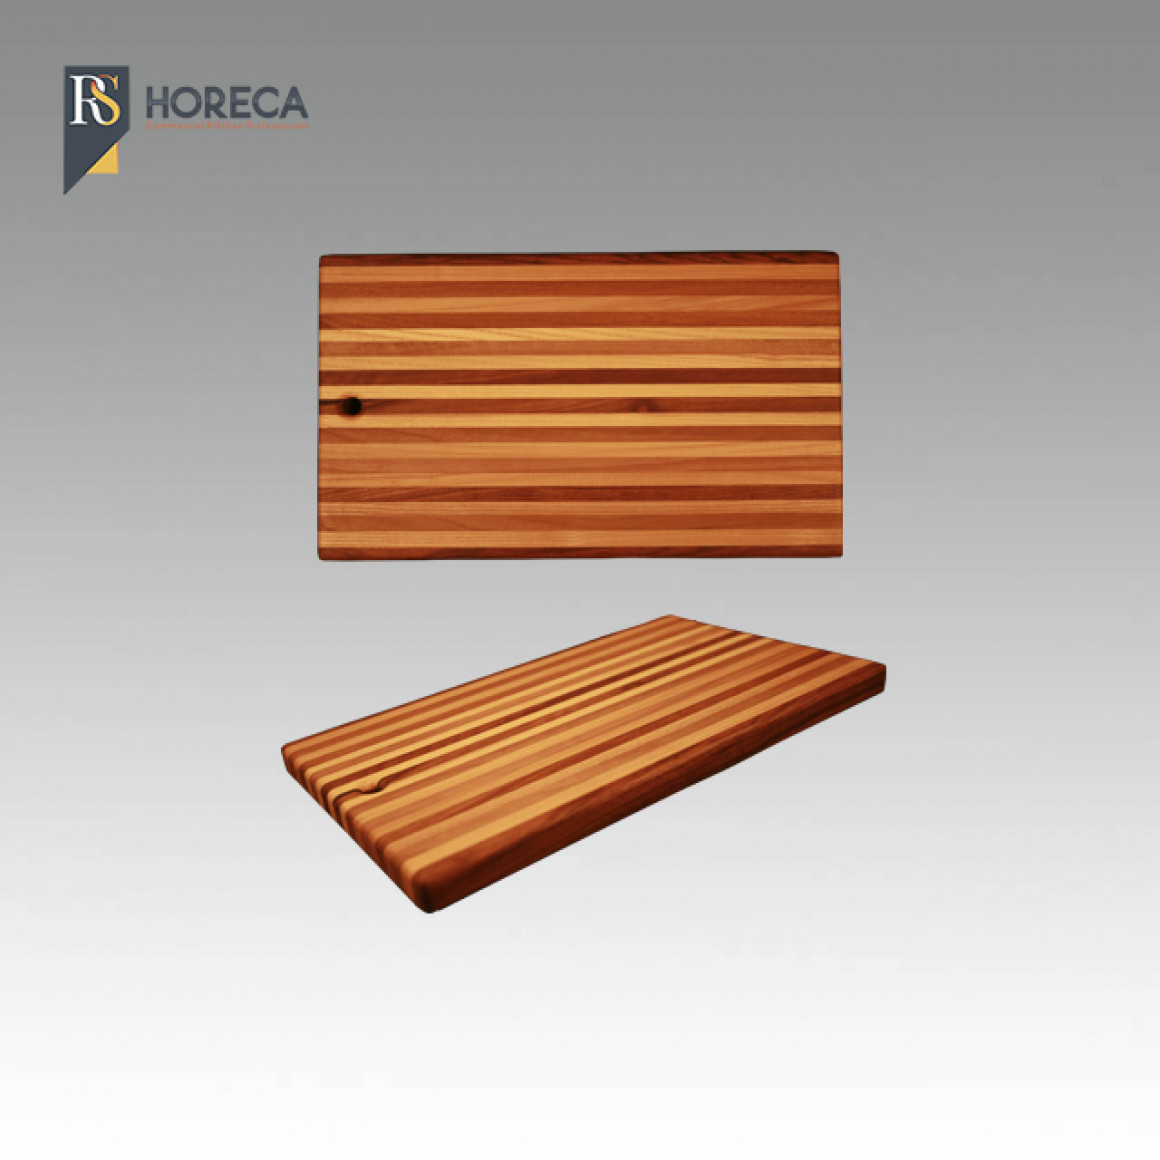 Cutting Board with Stripes, Rectangular